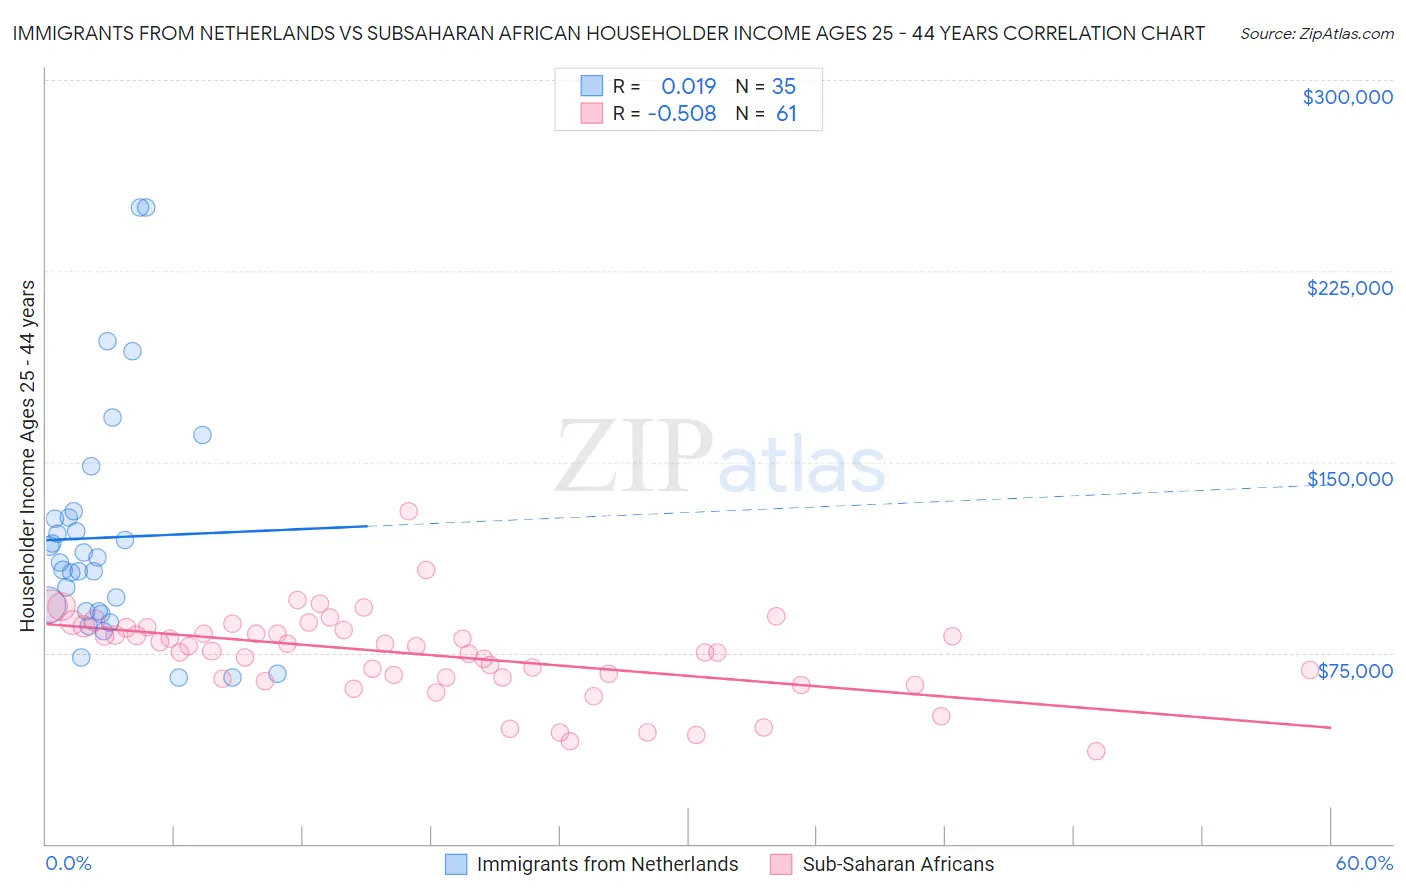 Immigrants from Netherlands vs Subsaharan African Householder Income Ages 25 - 44 years